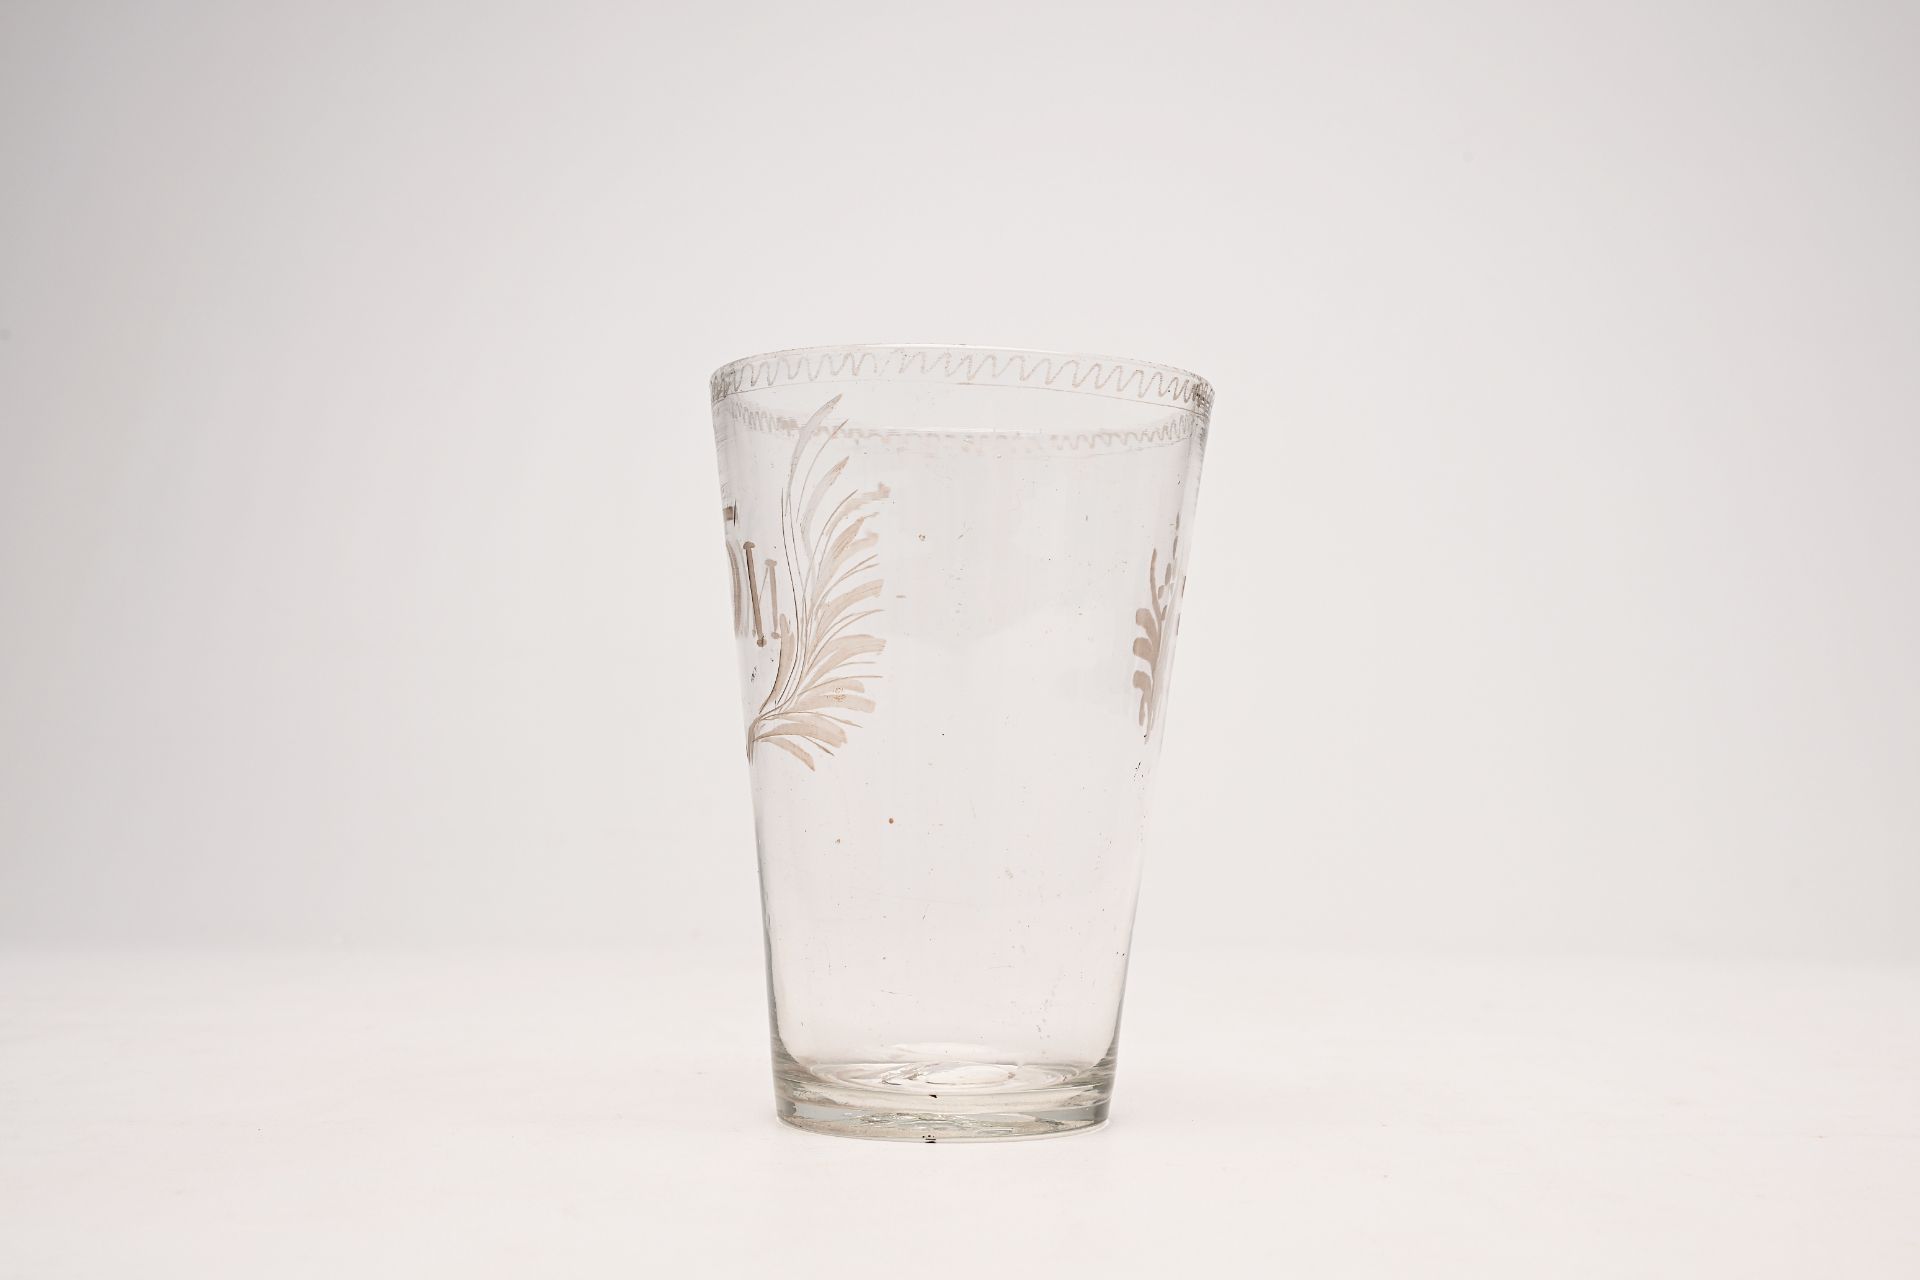 An etched or engraved glass with monogram NOI, end 18th C. - Image 3 of 6